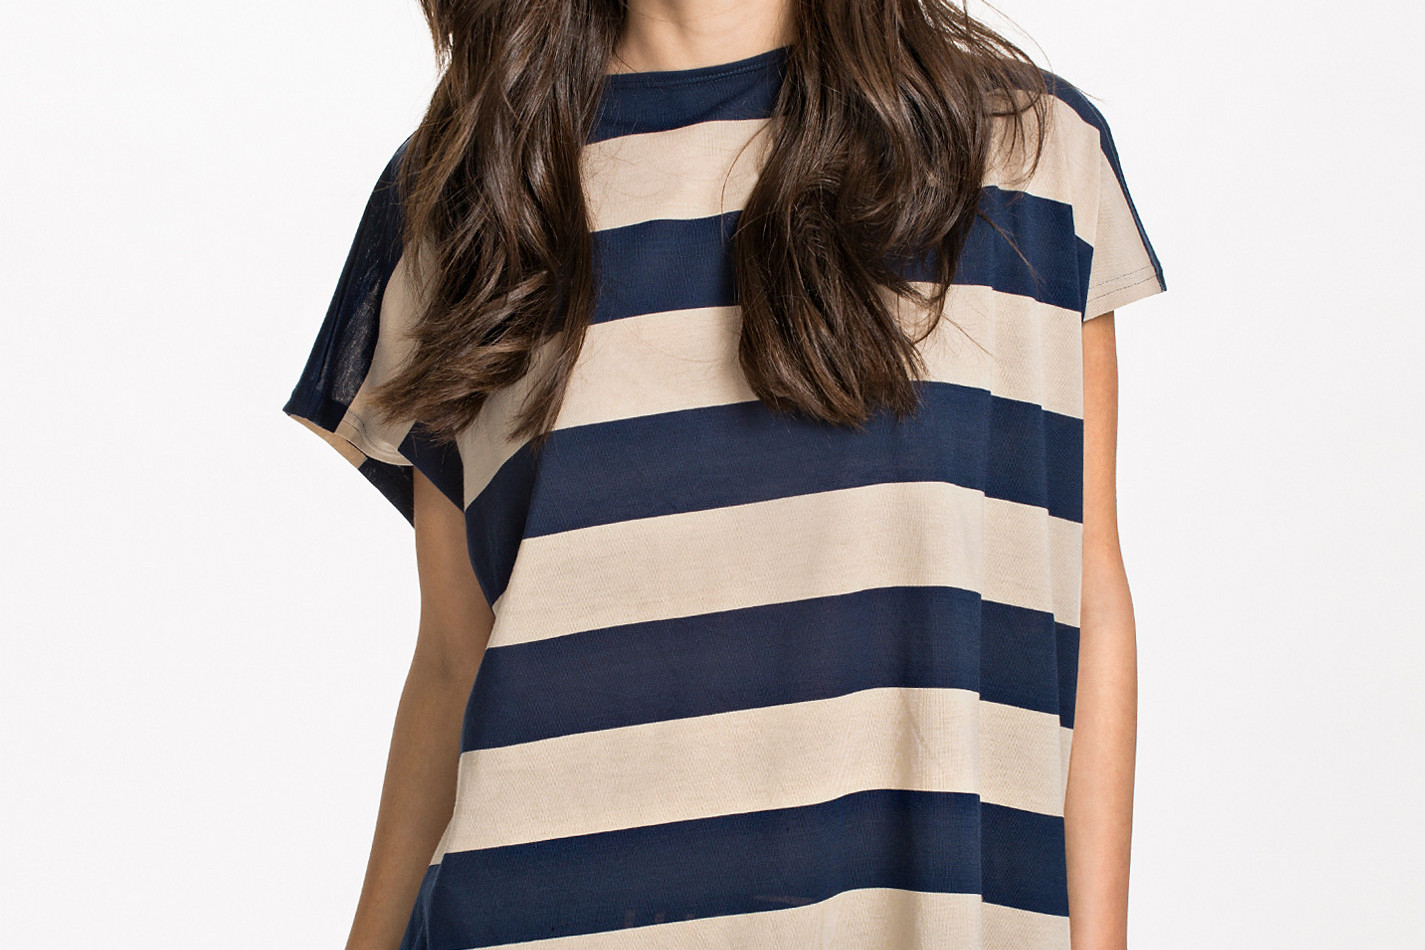 Striped oversize top from Cheap Monday